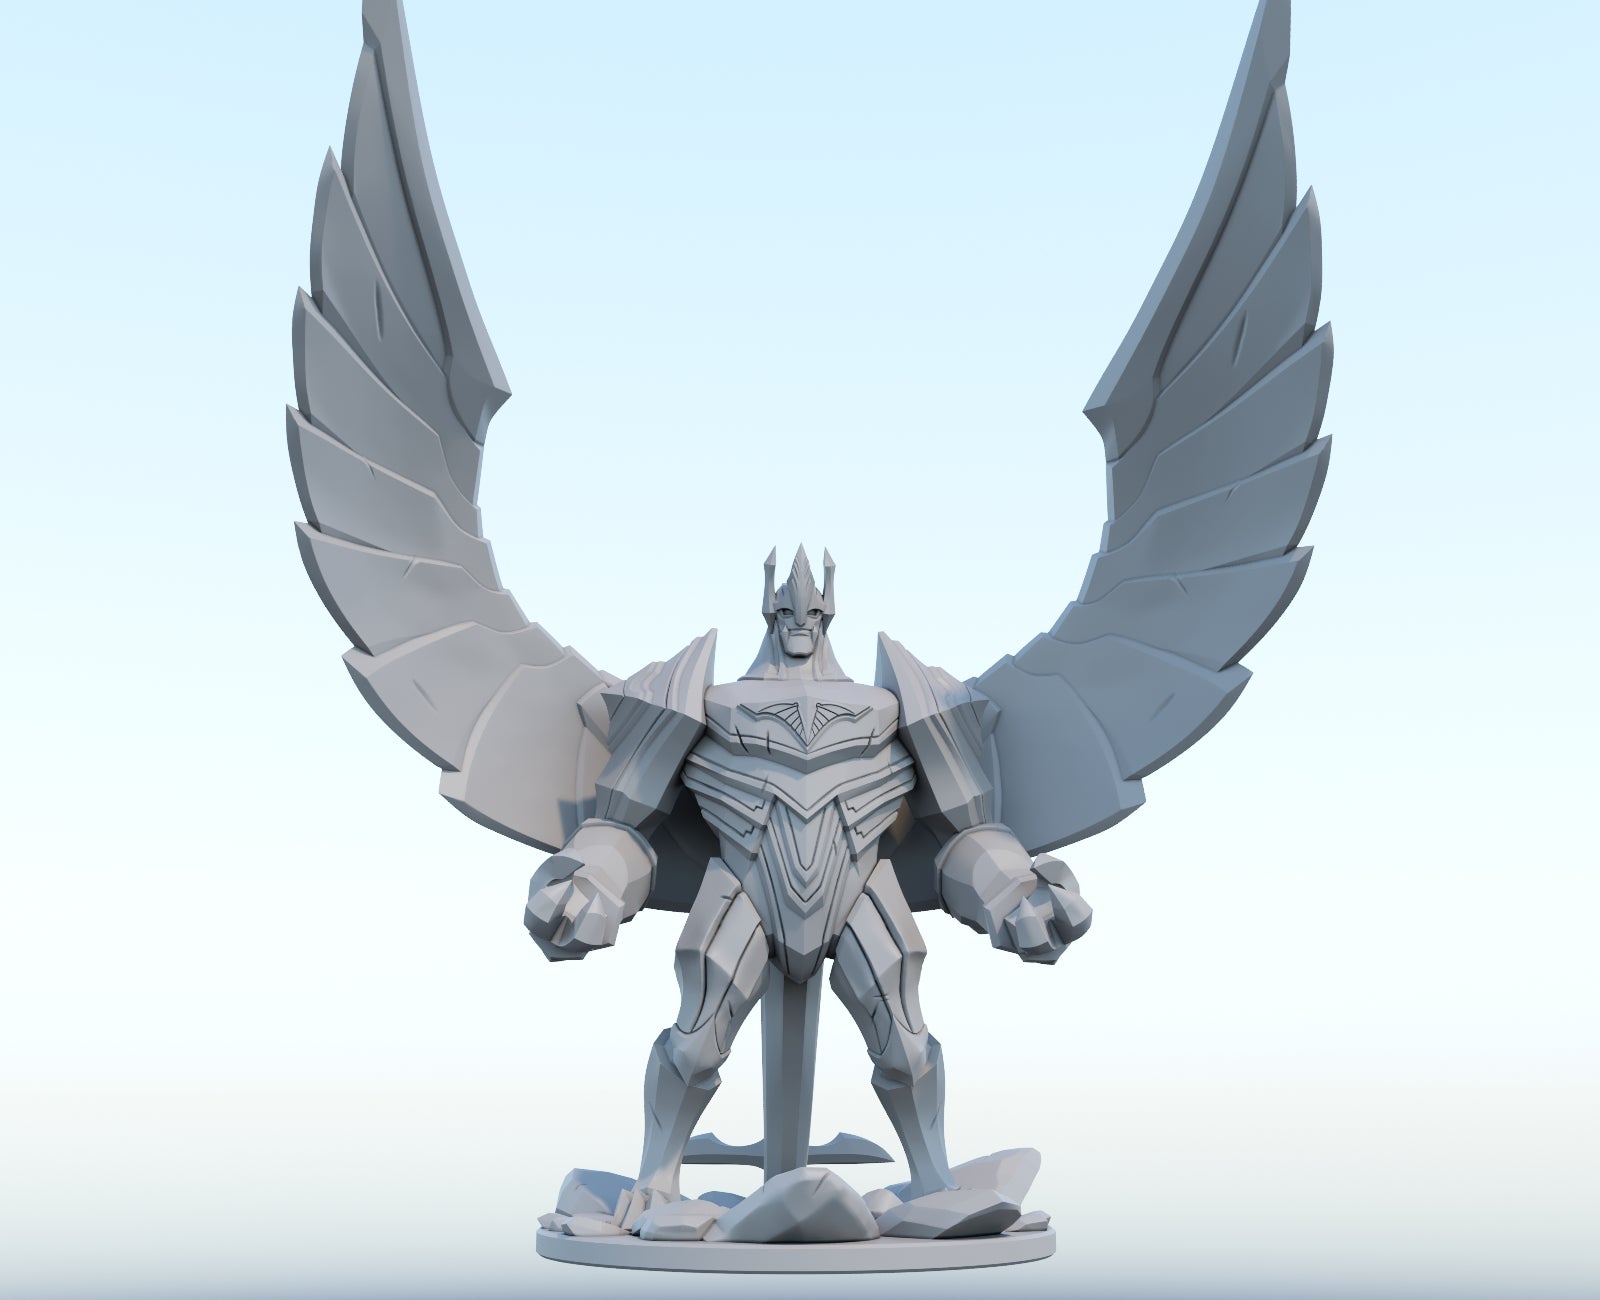 Galio 3D-printed League of Legends champion figure. Decorate your gaming setup or home with your favorite League of Legends champion! Choose between the unpainted version, perfect for you to paint yourself, or the hand-painted version by a professional painter. Order your figure today!